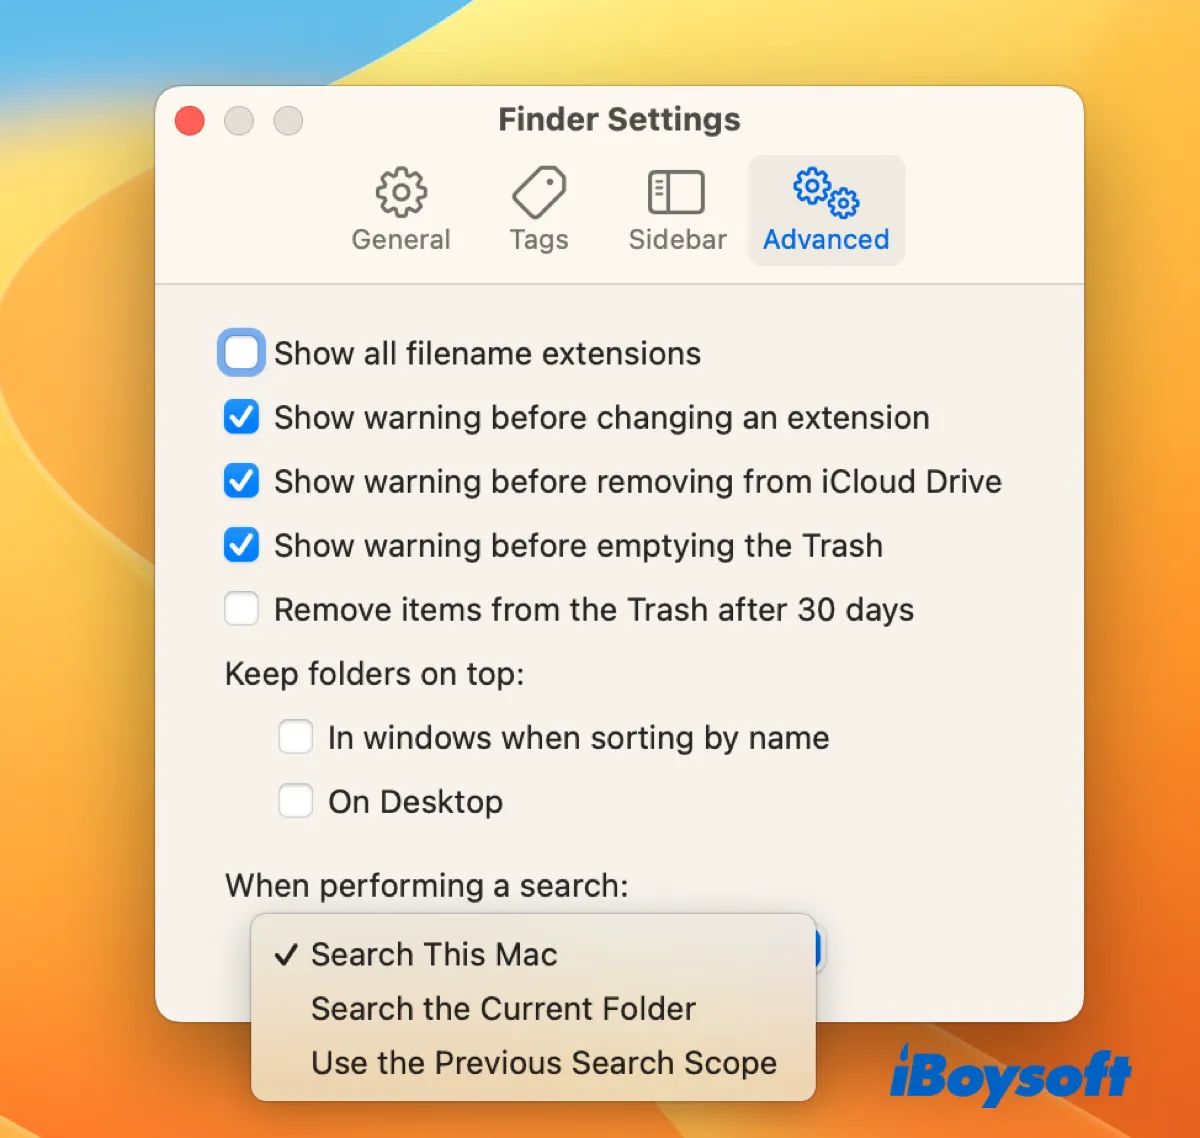 Change what folder your Mac will search when performing a search